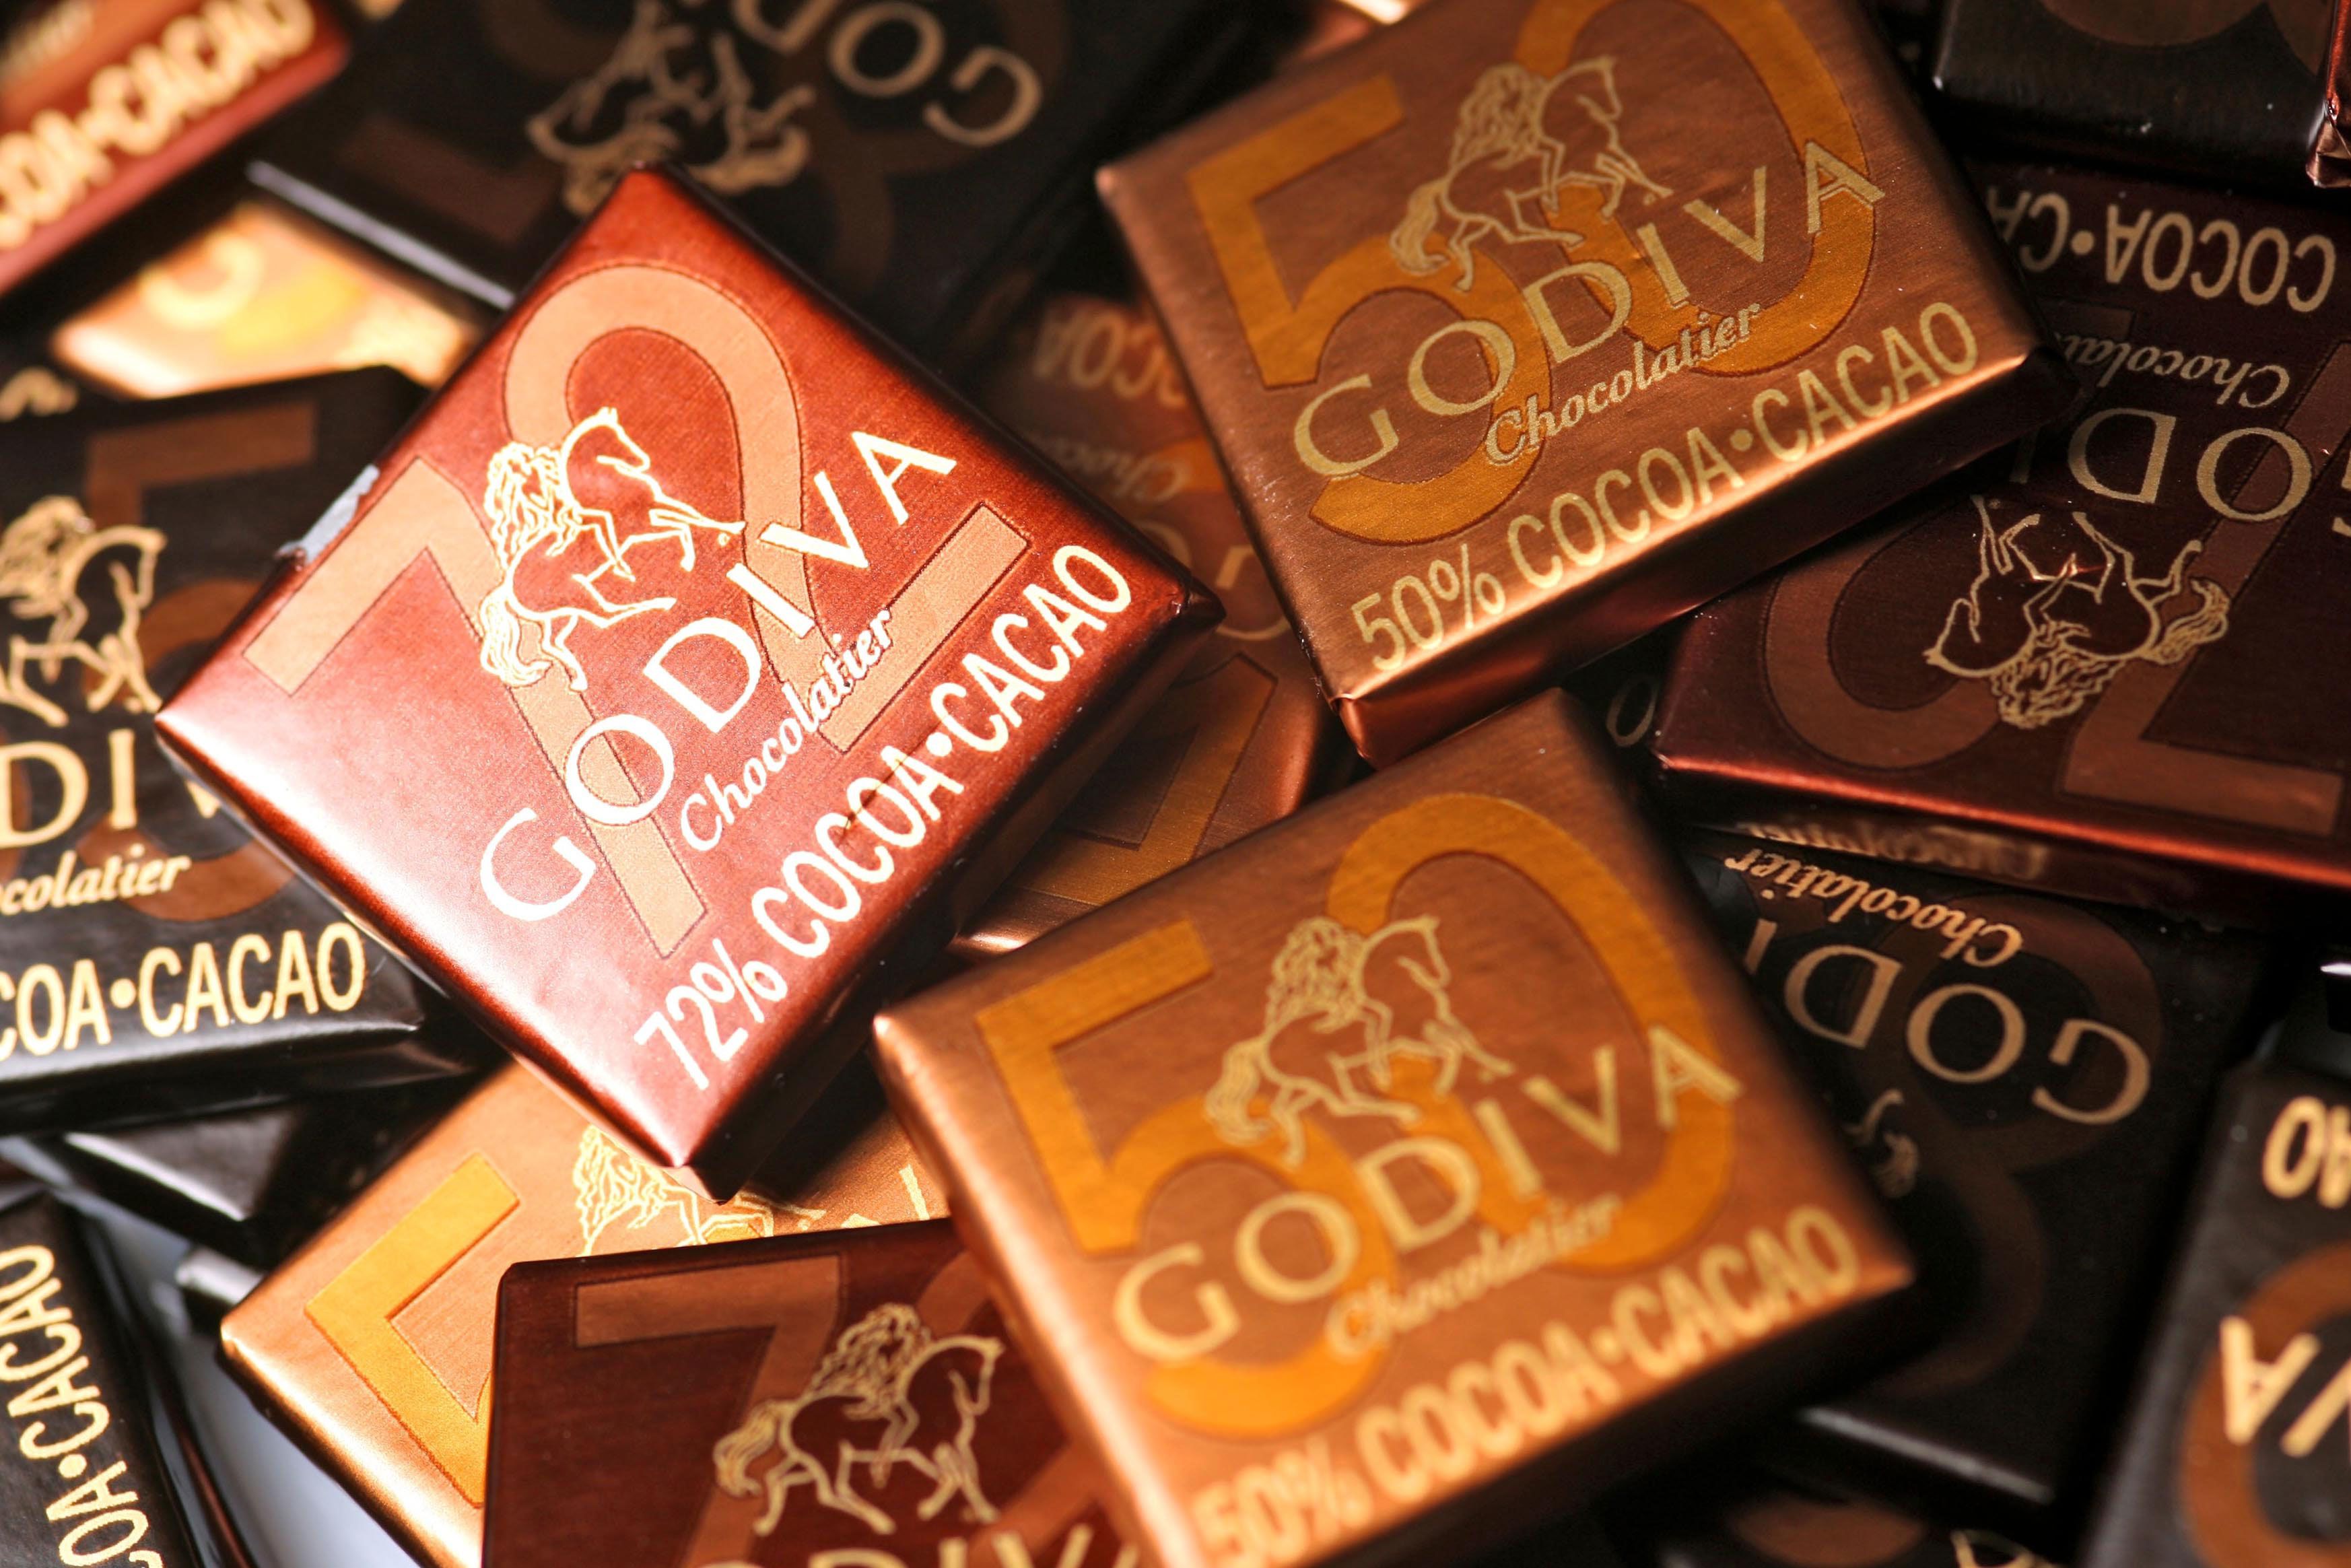 Godiva closing its U.S. chocolate stores, including 1 at Ross Park